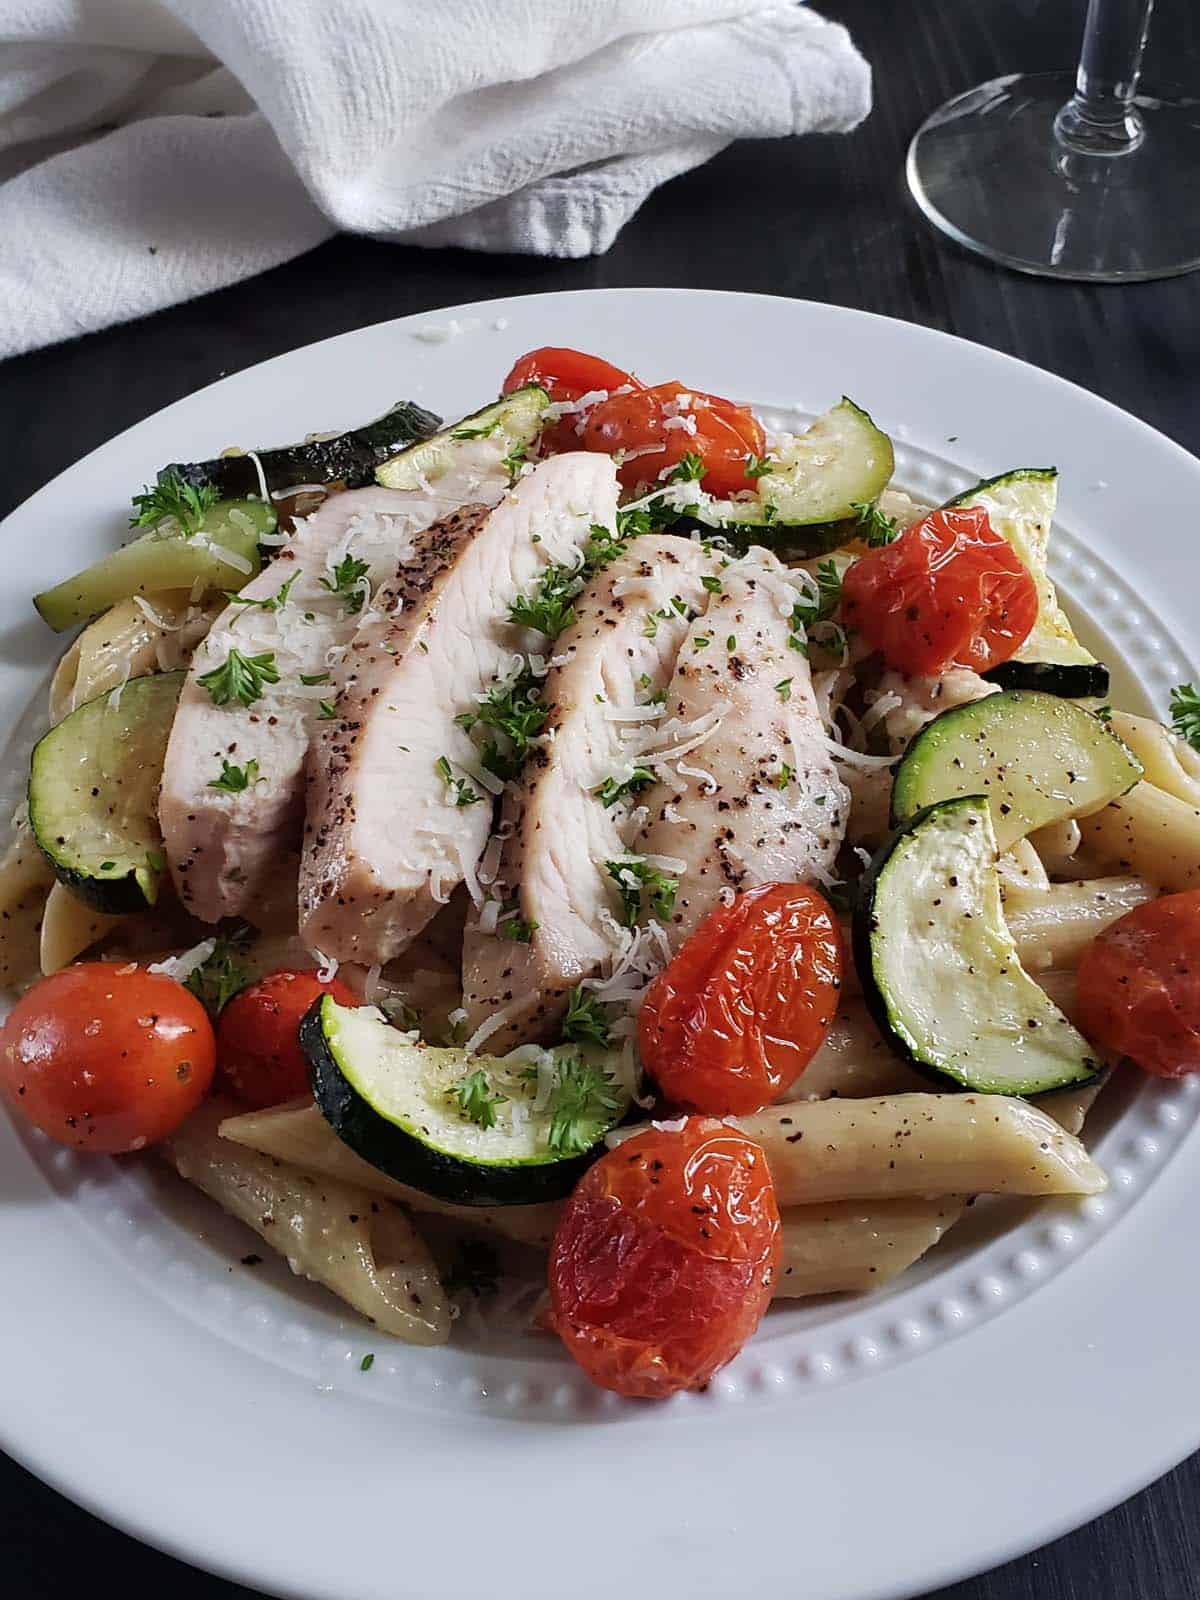 Cacio e pepe with vegetables and chicken on a white plate.